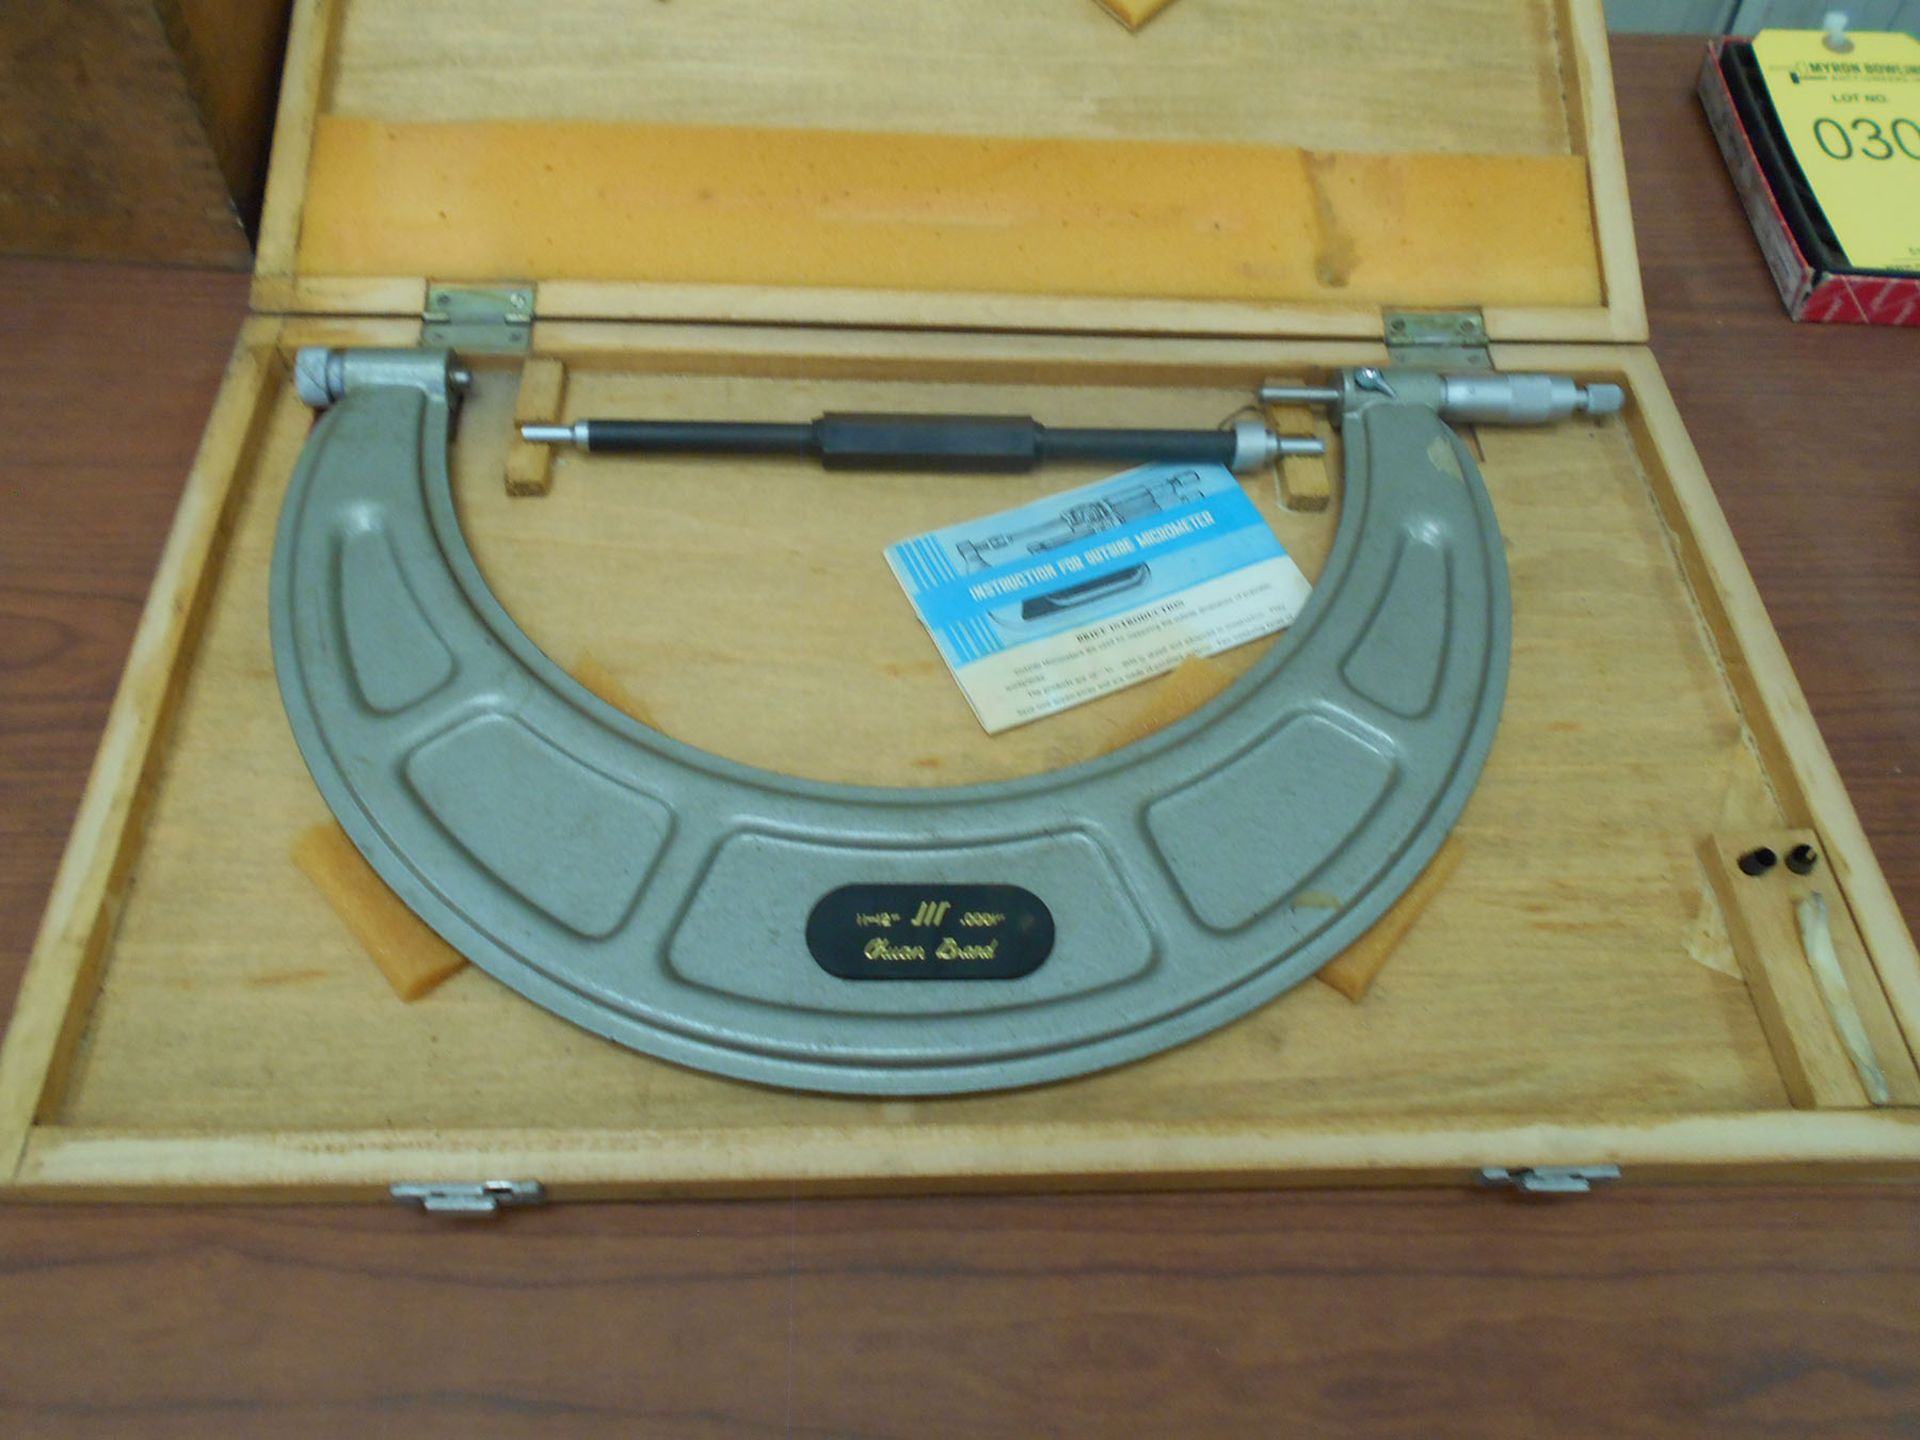 CHUAN BRAND OUTSIDE MICROMETER; 11-12'' TO .0001'' - Image 3 of 4